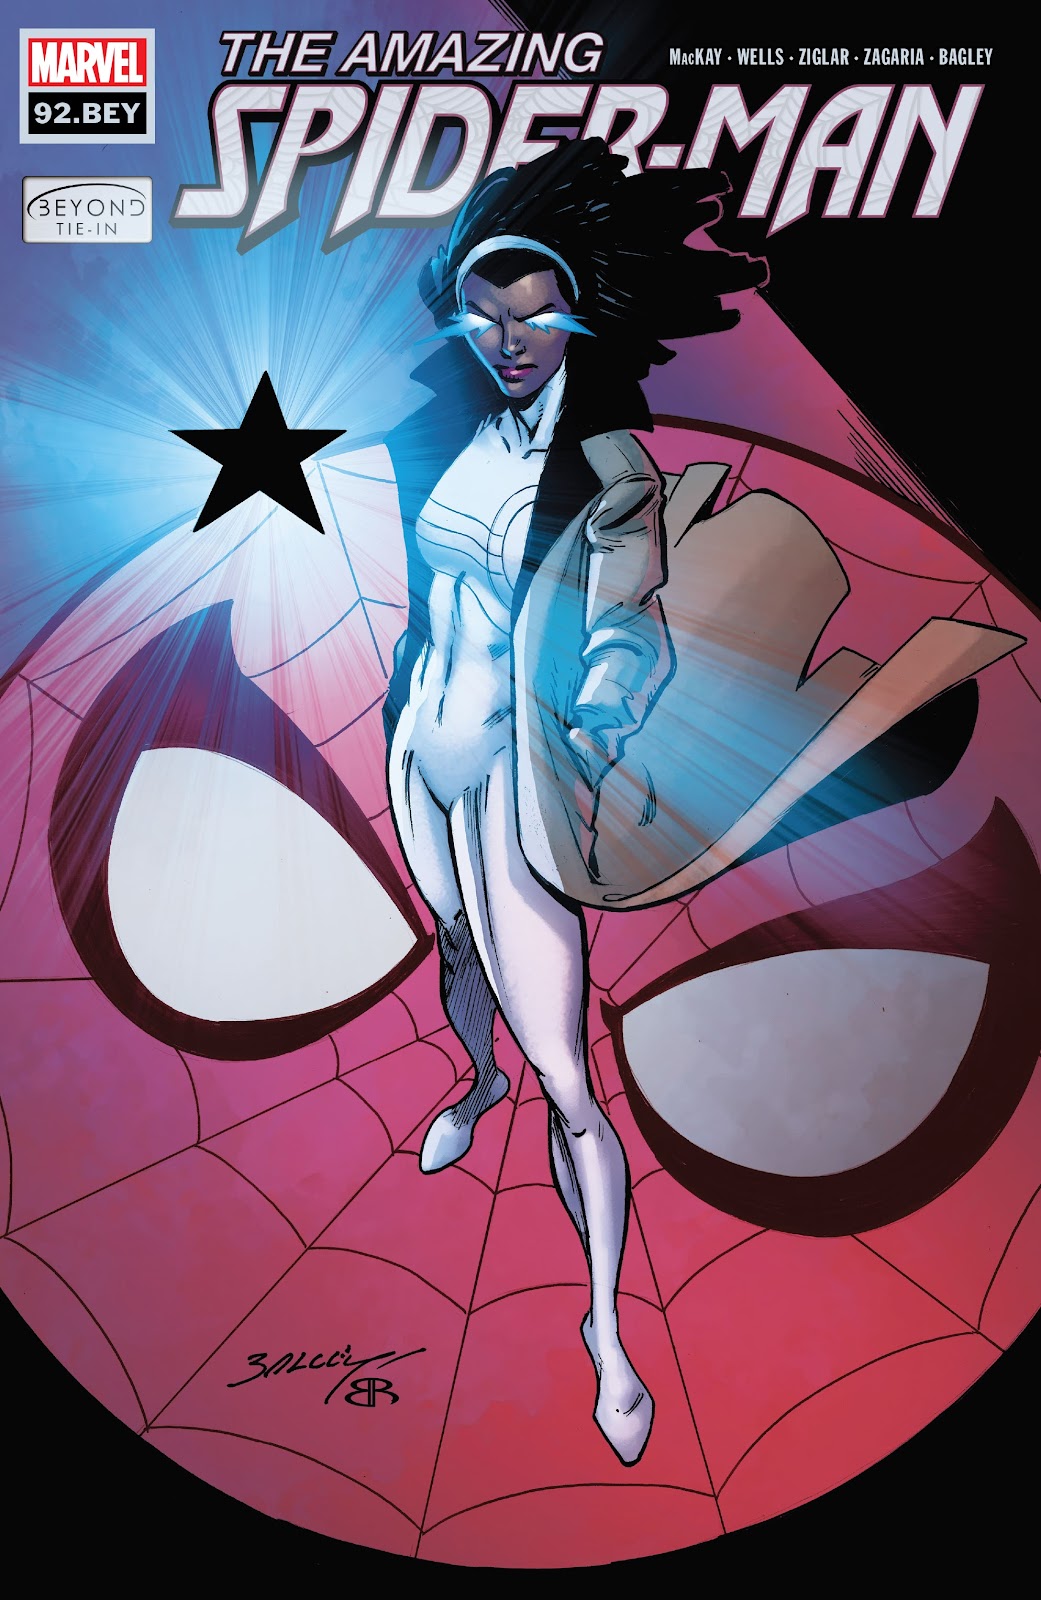 The Amazing Spider-Man (2018) issue 92.BEY - Page 1